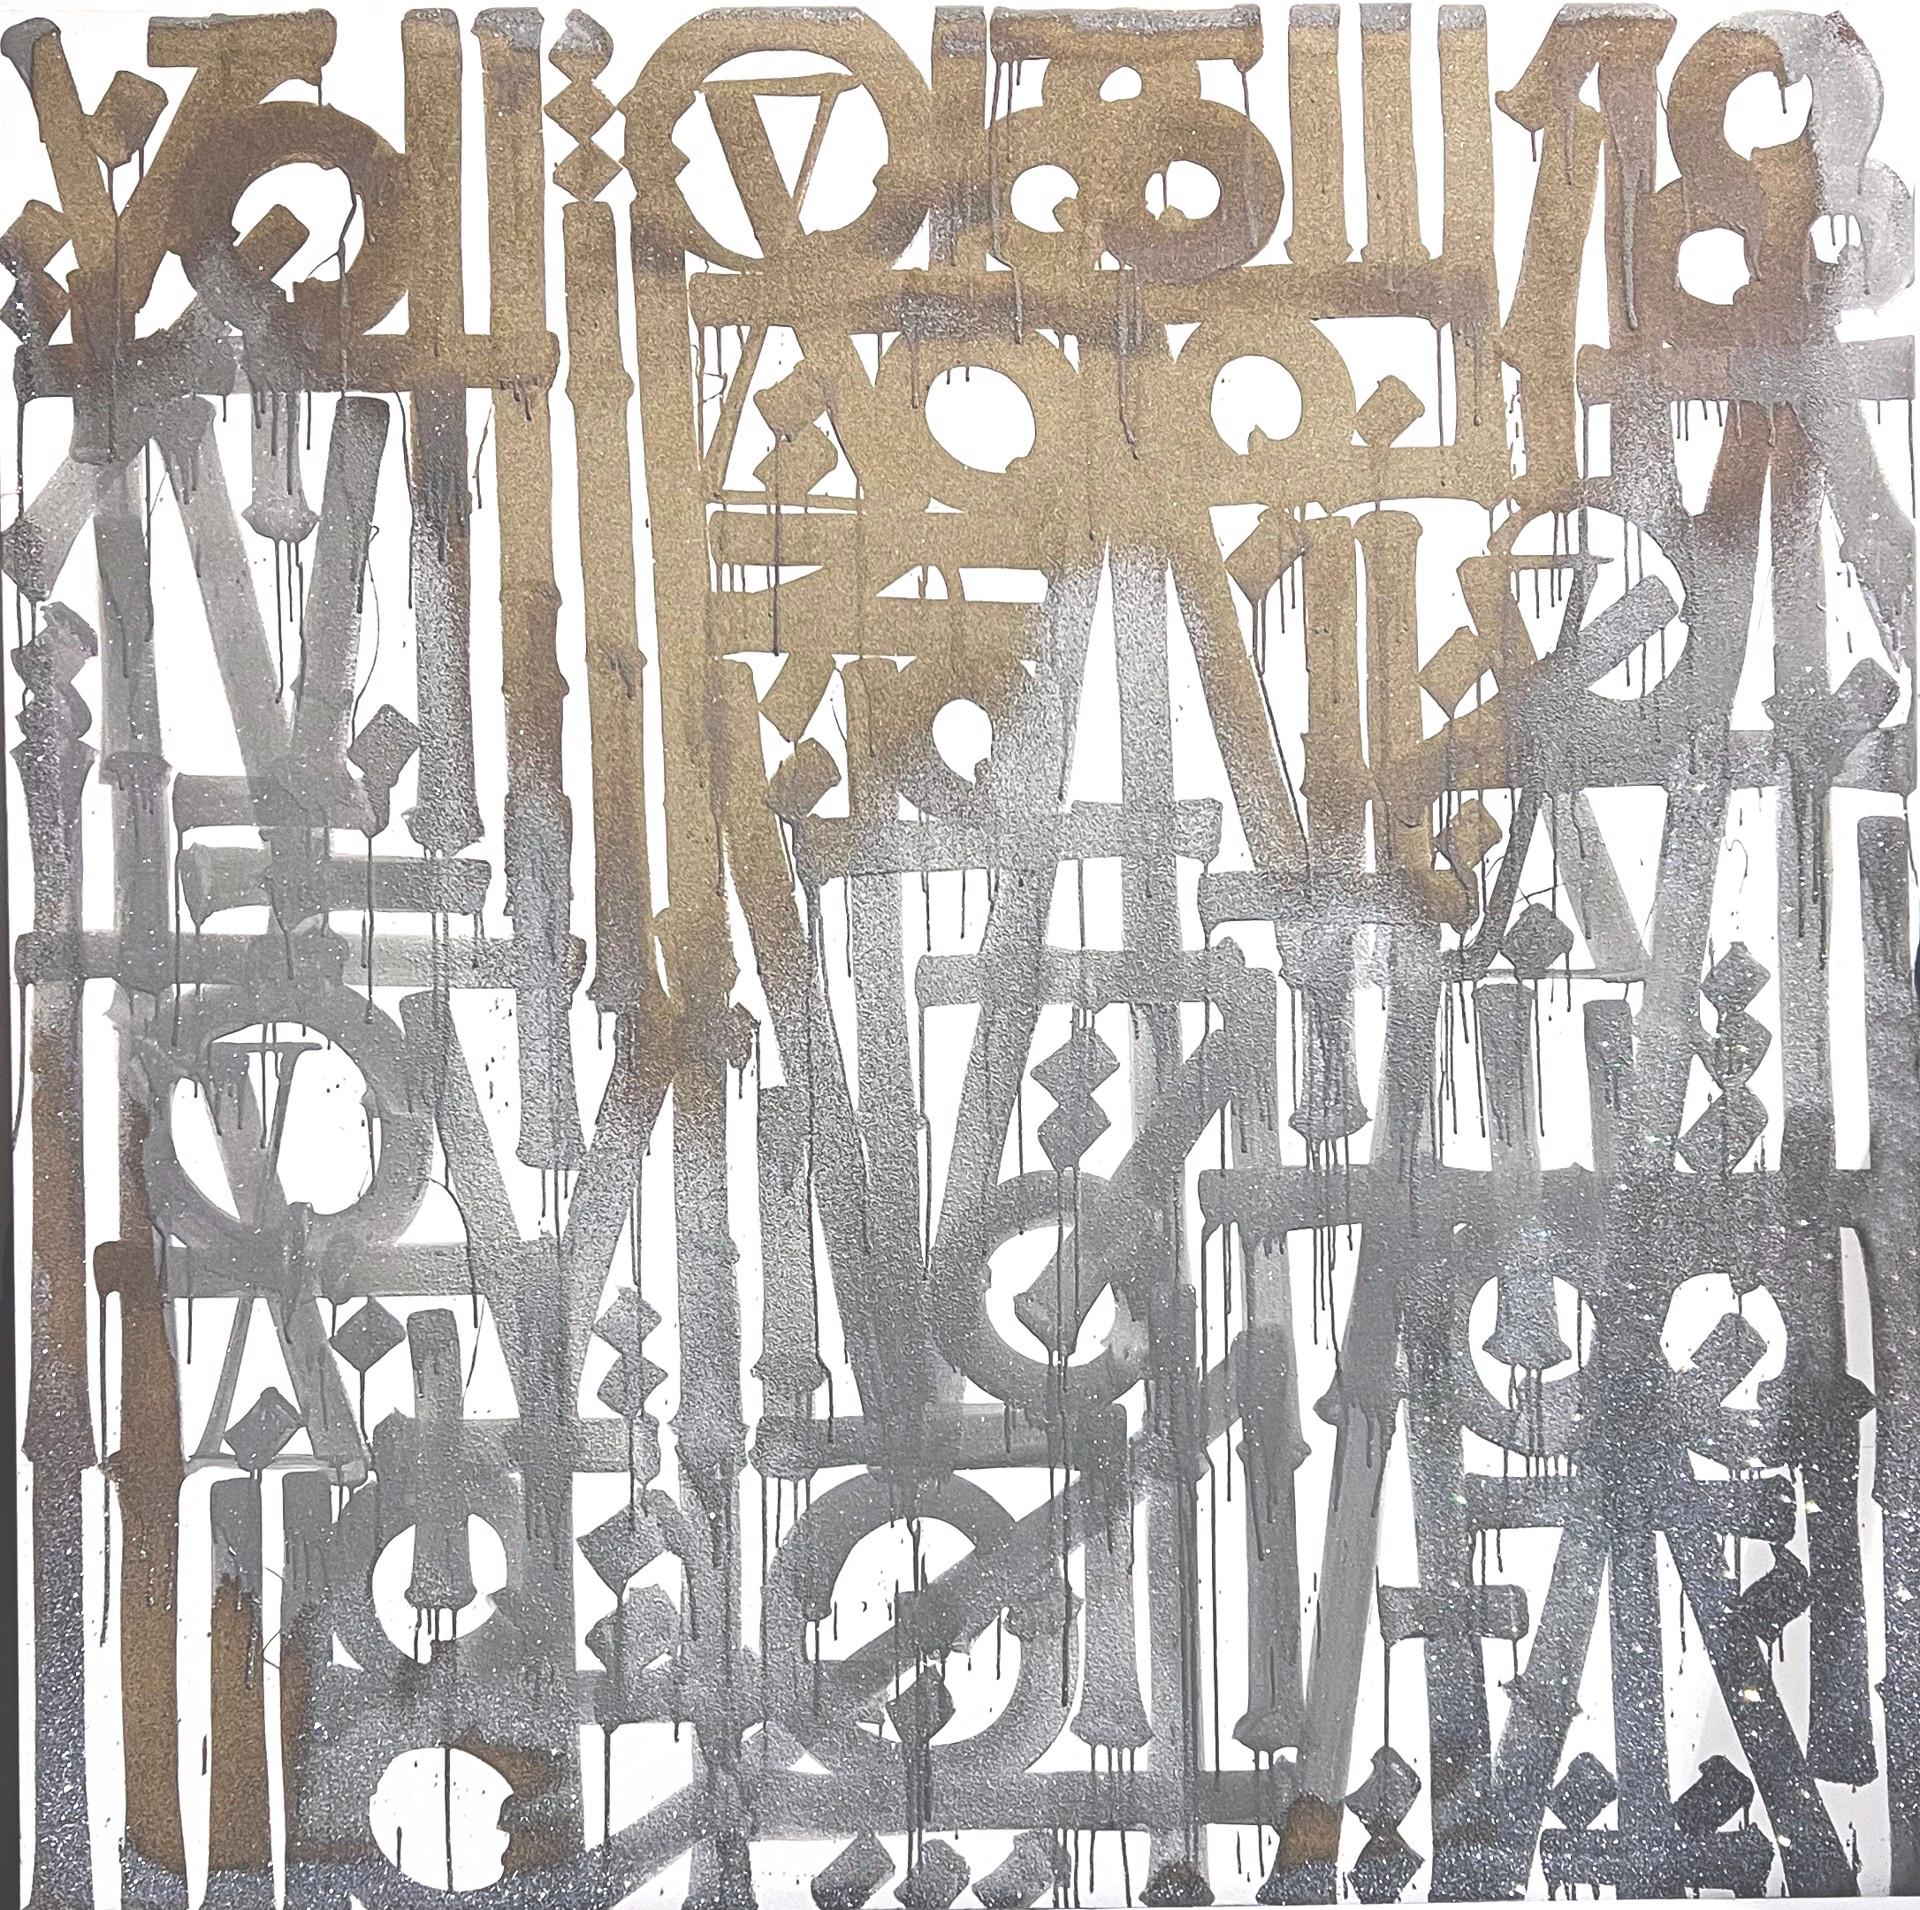 I Love You, Not Just You - Painting by RETNA